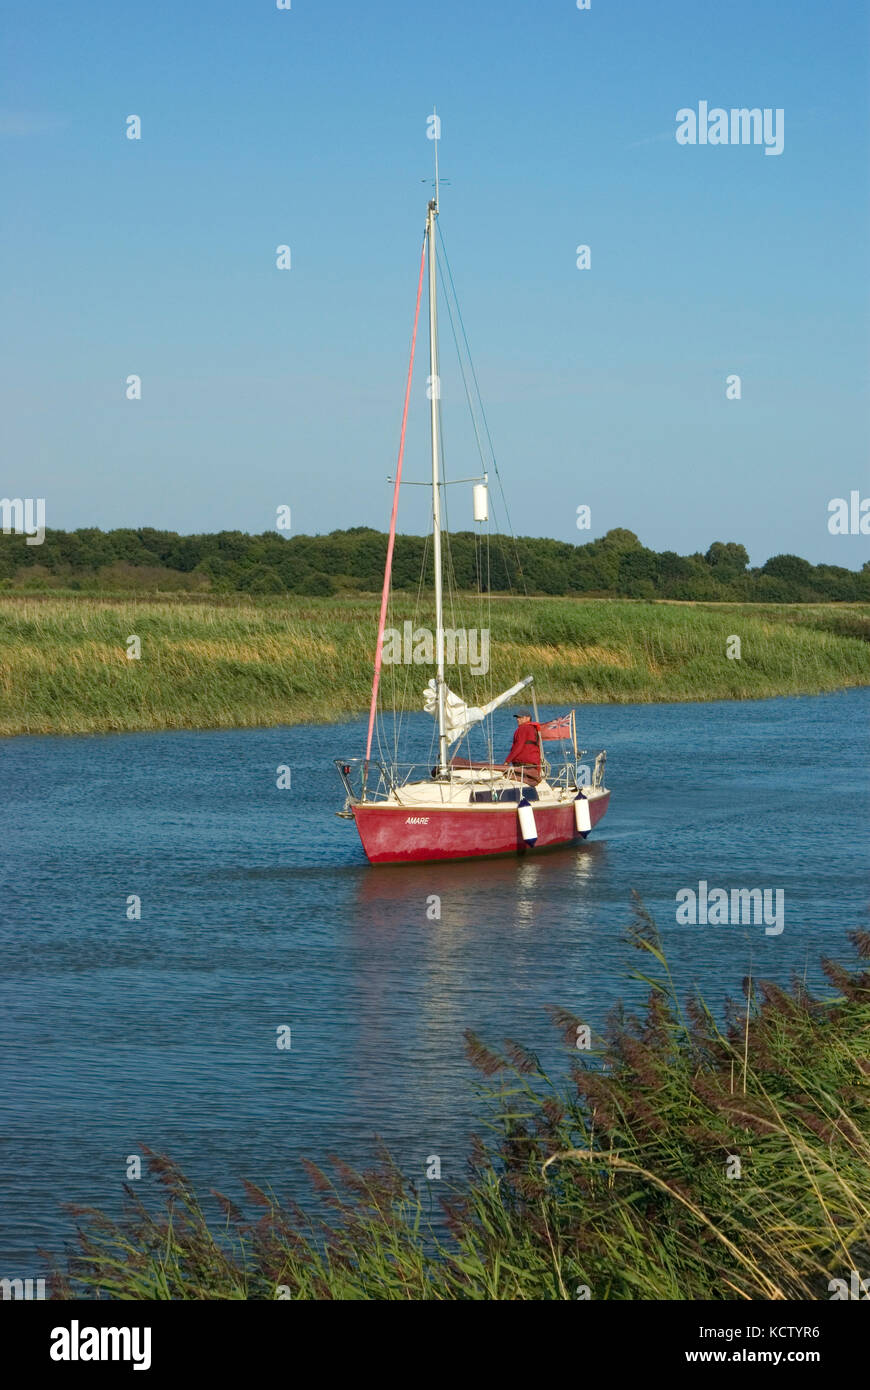 Sailing on the River Alde Stock Photo